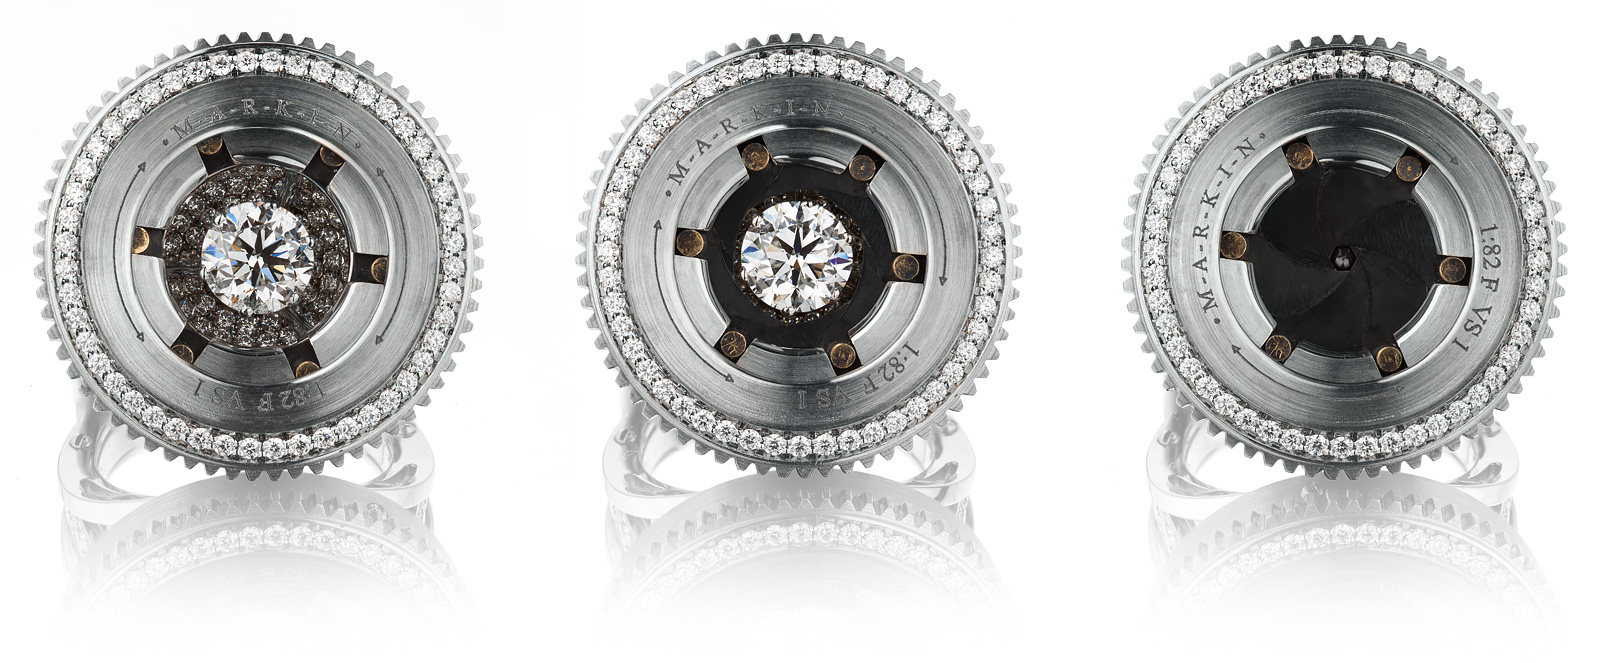 The Markin Aperture No. 2 Ring